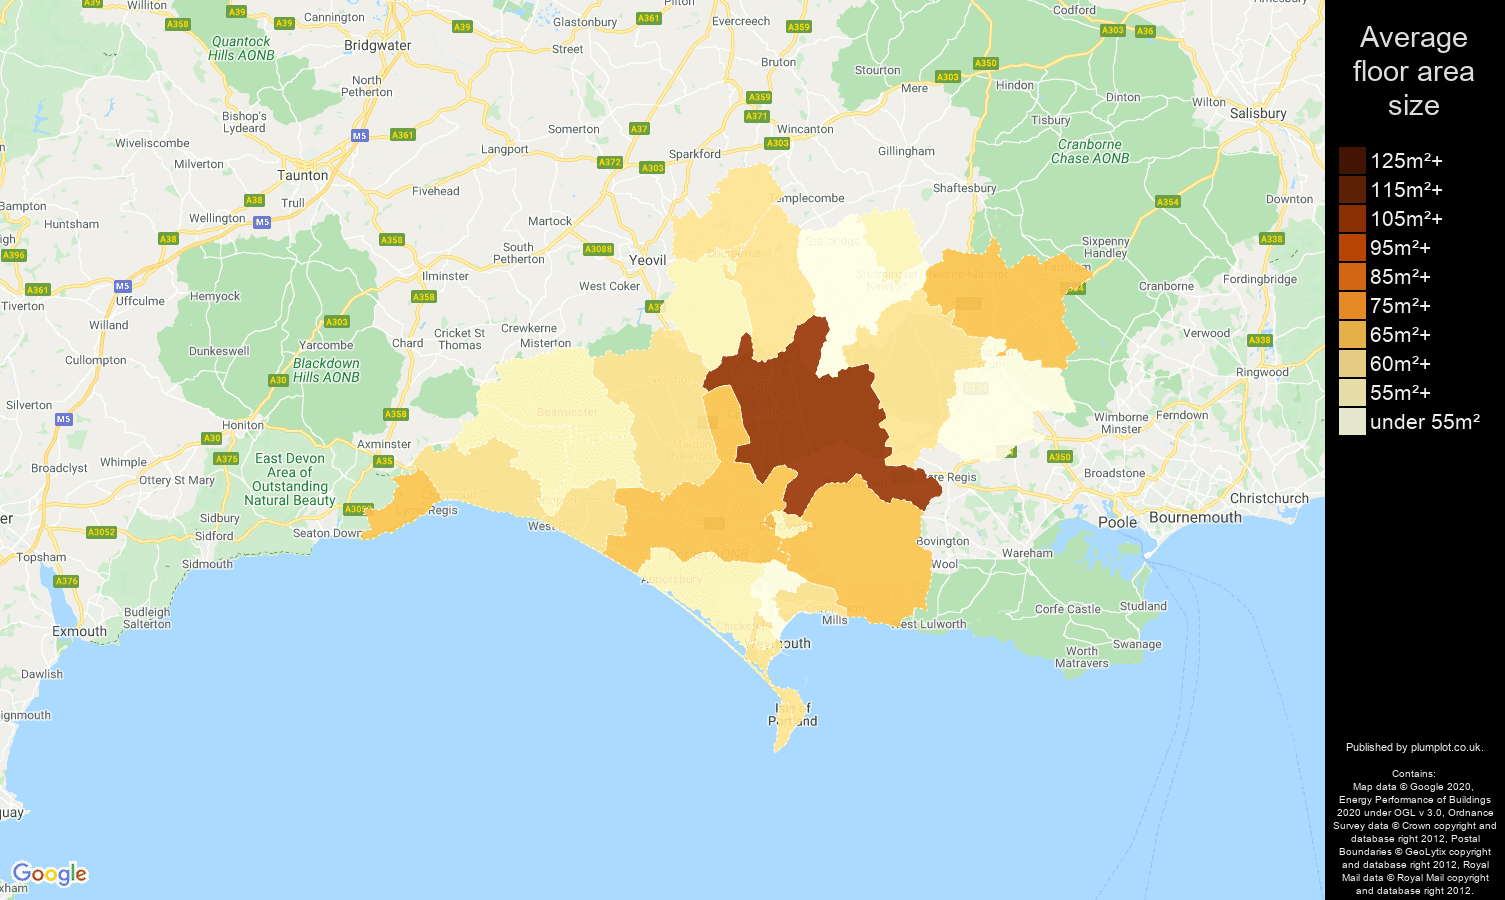 Dorchester map of average floor area size of flats